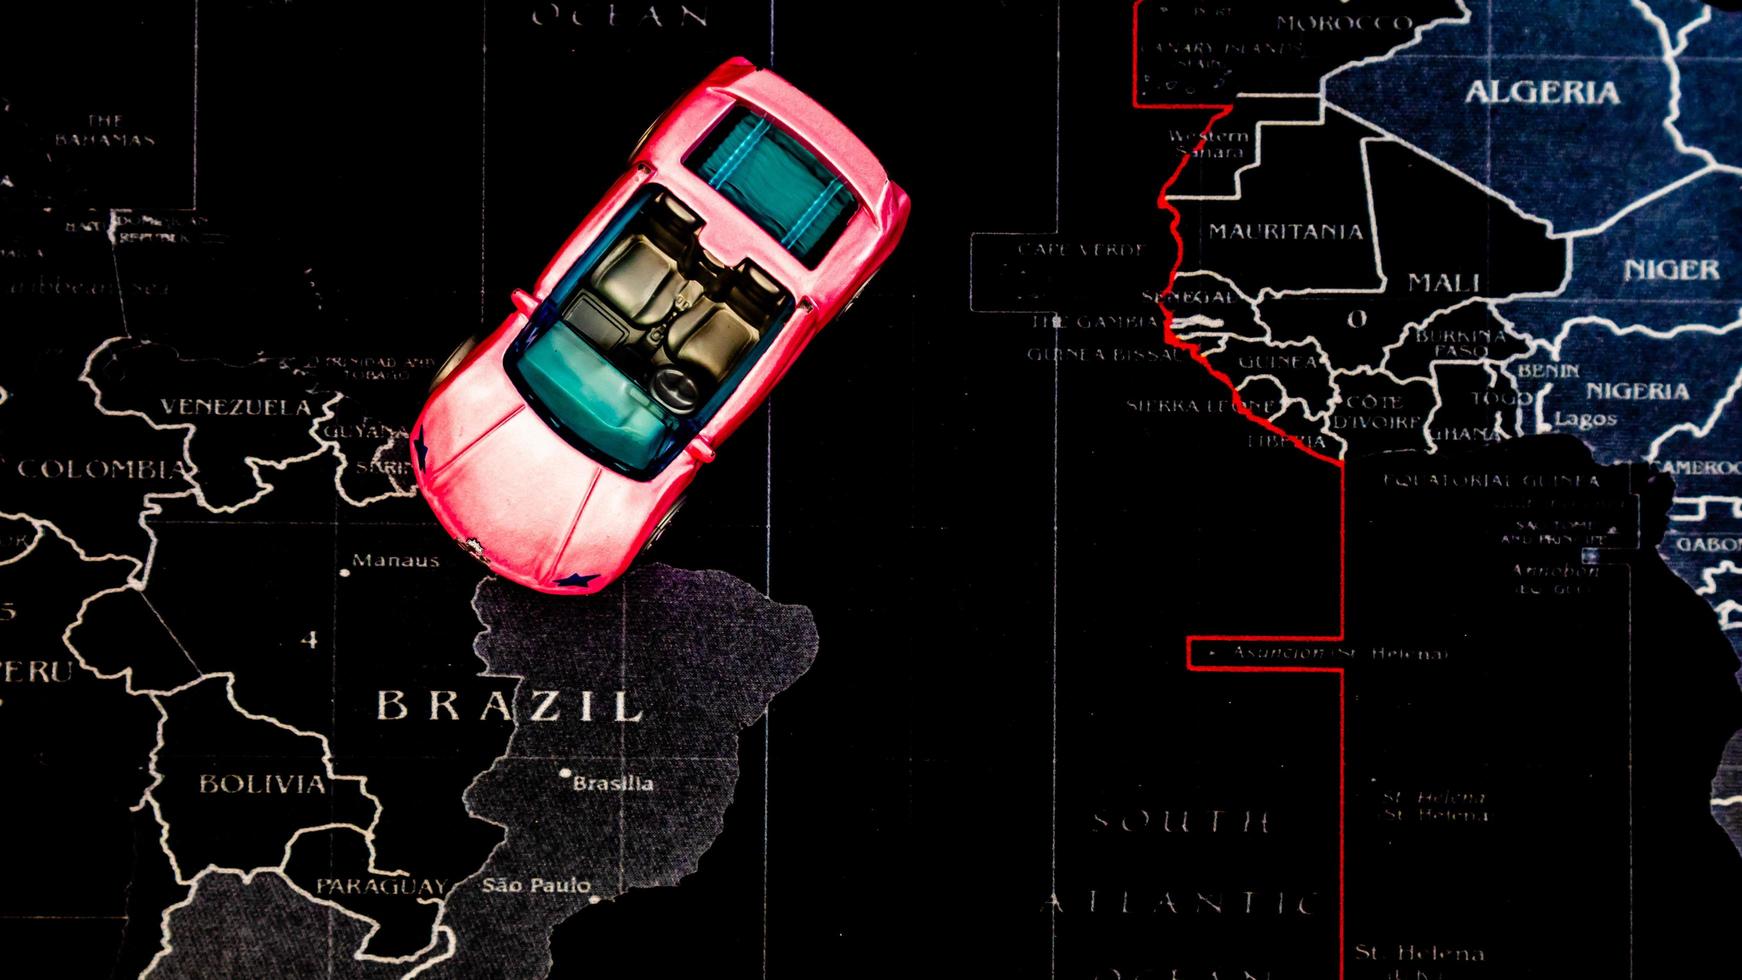 Minahasa, Indonesia  December 2022, pink toy car over map photo